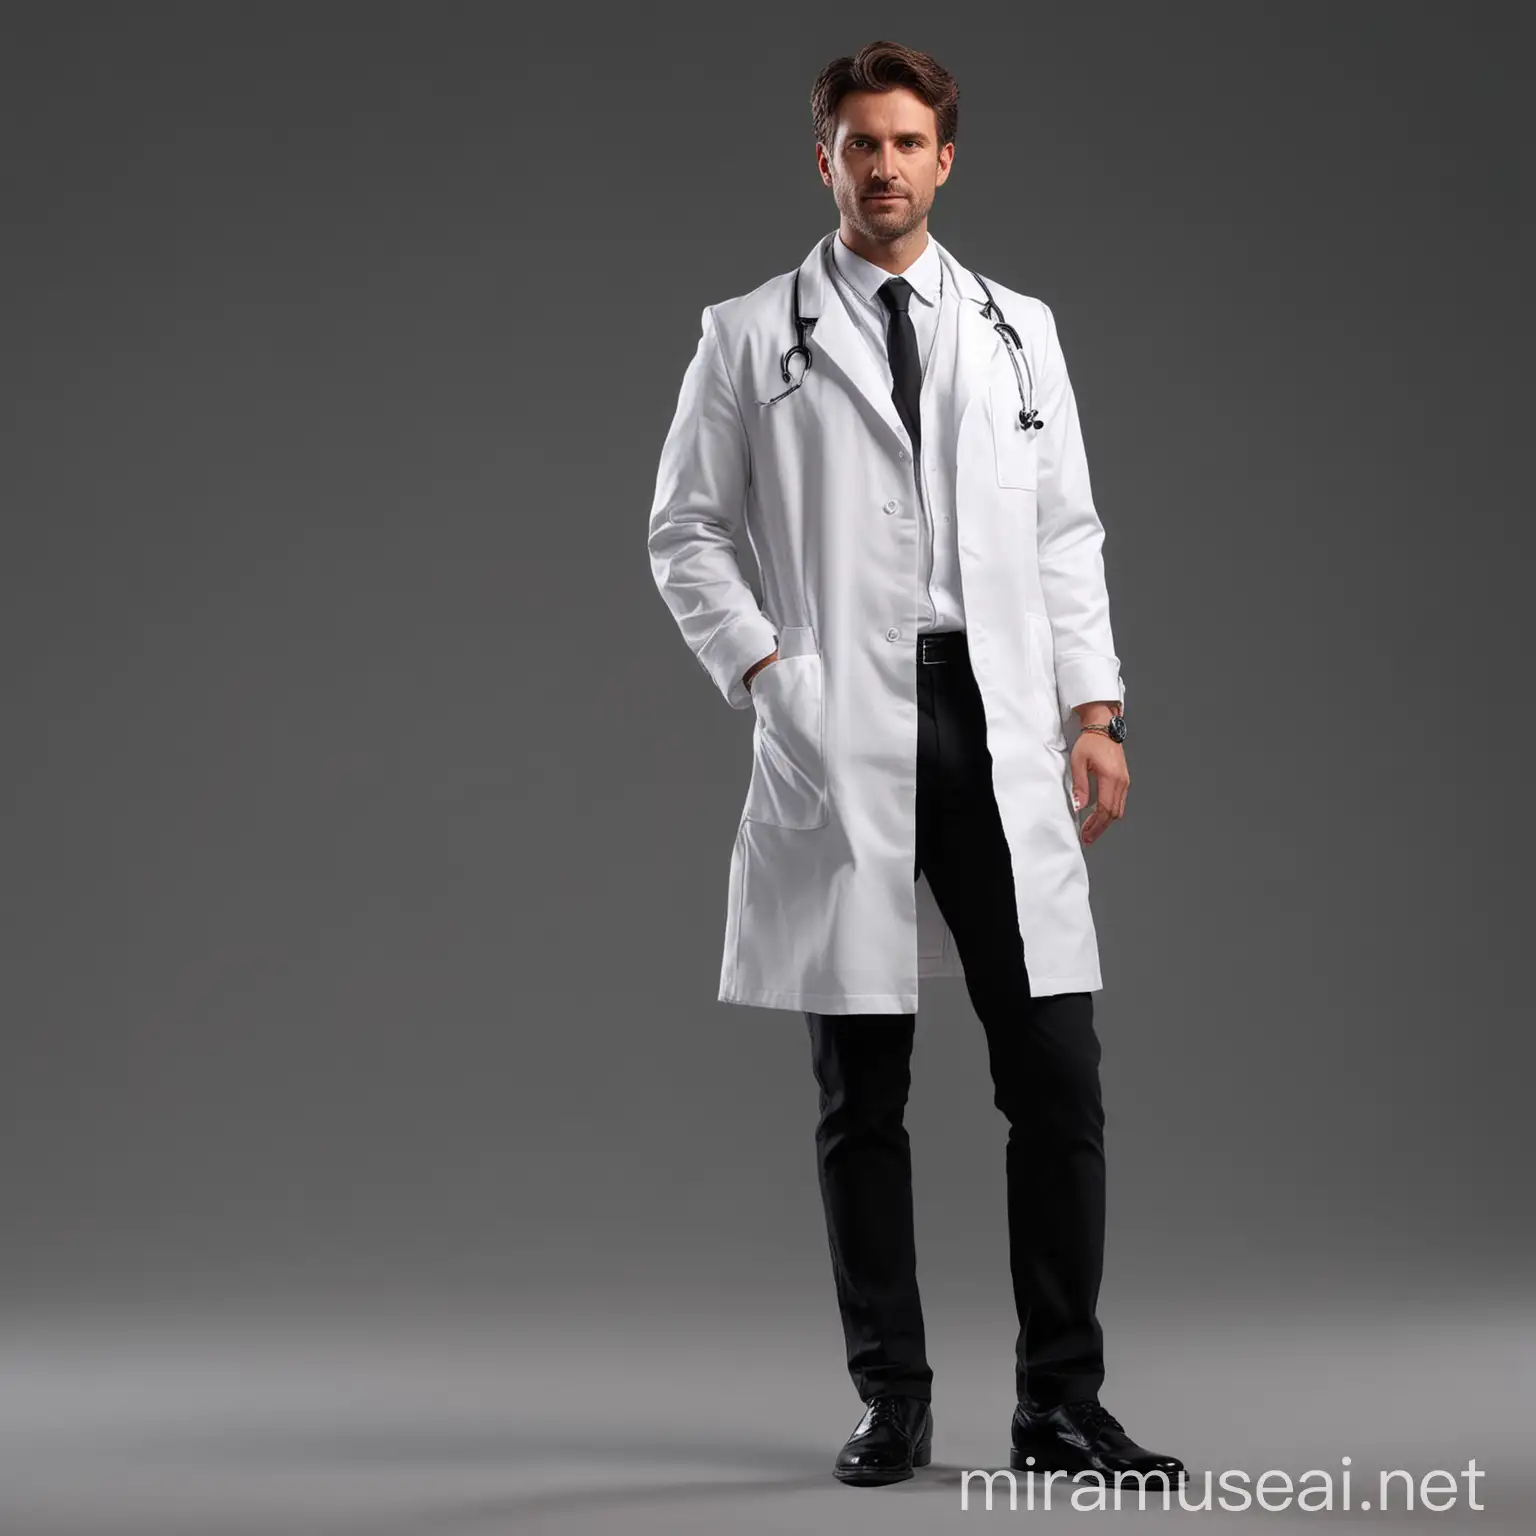 Professional Male Doctor in Elegant Attire on Plain Background